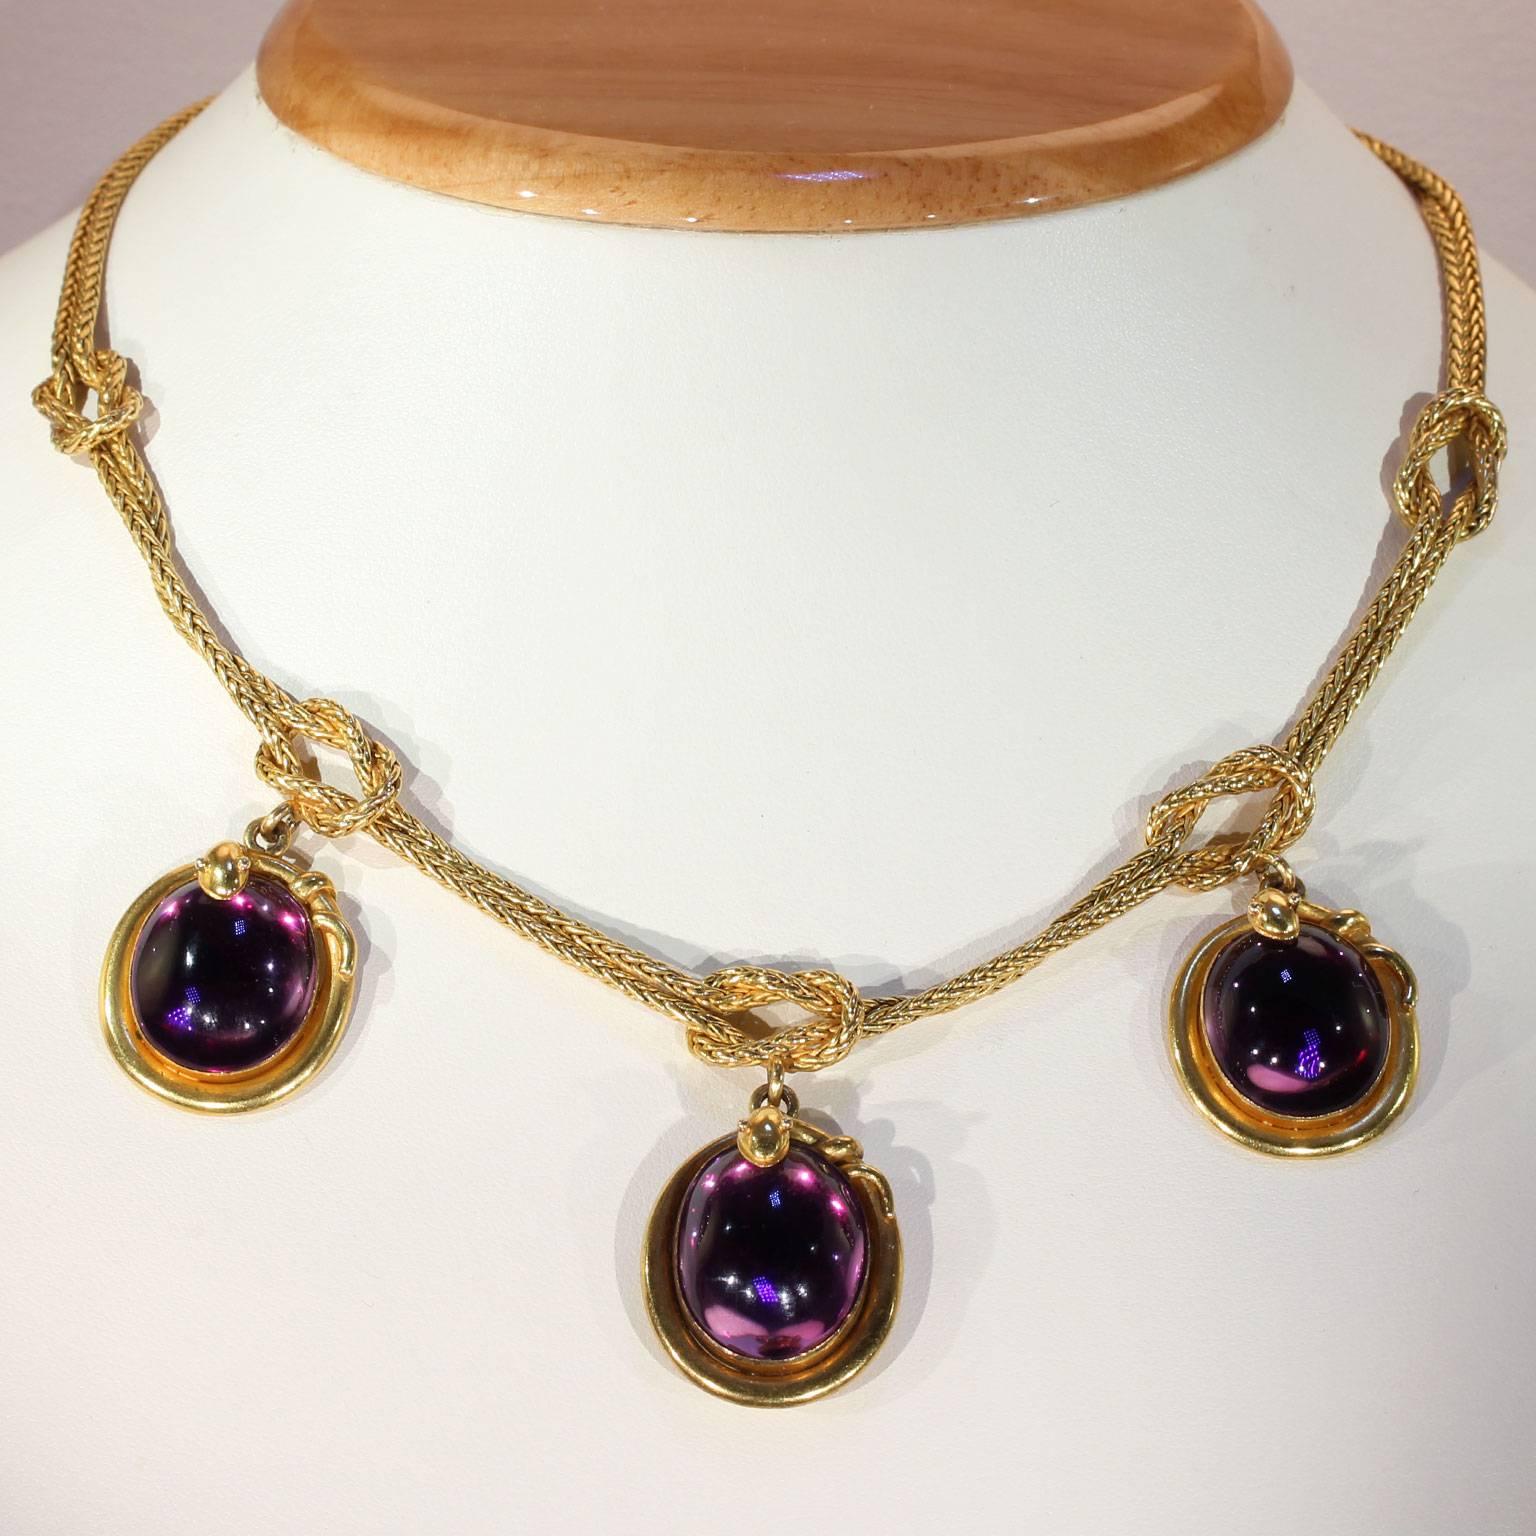 High Victorian Victorian Amethyst Gold Snake Necklace Earrings Set For Sale